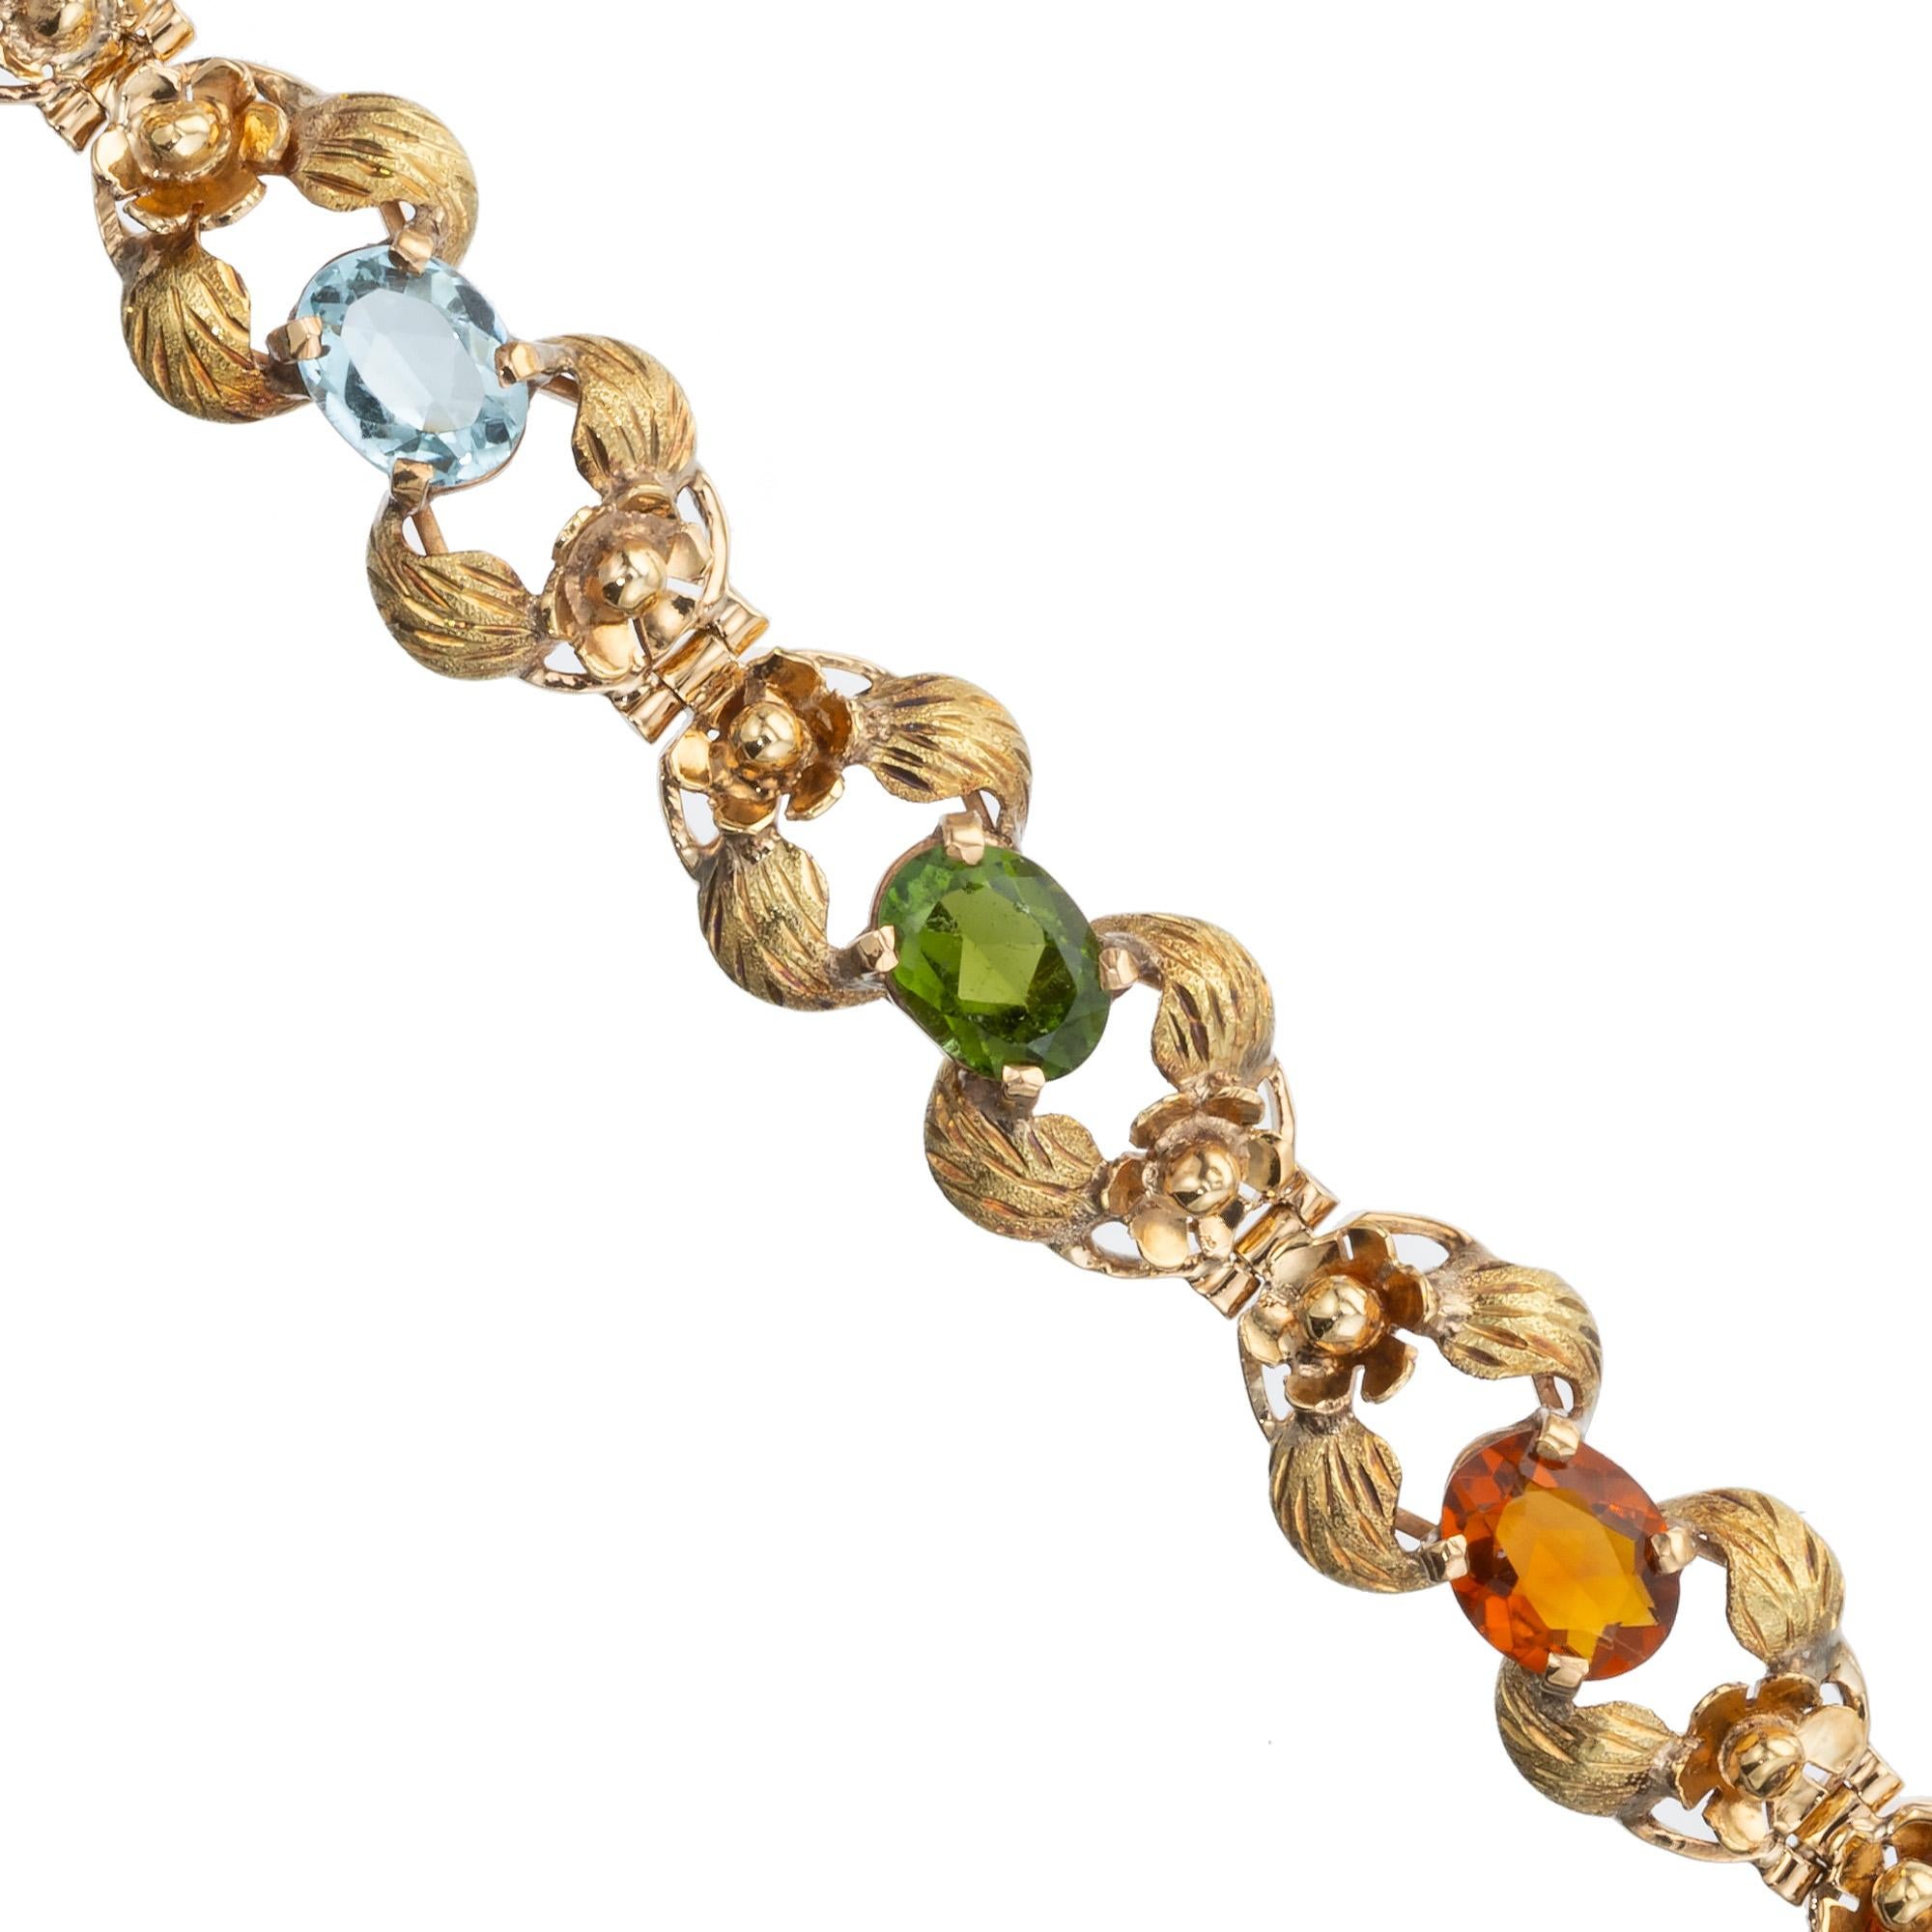 1940's Handmade rose gold multi-stone bracelet. Textured green gold leaves separated by 8 different oval gemstones. Tourmaline, Madera Citrine, Amethyst, Aquamarine and Yellow beryl Heliodore. Beautifully crafted 14k Rose green gold intricate links.